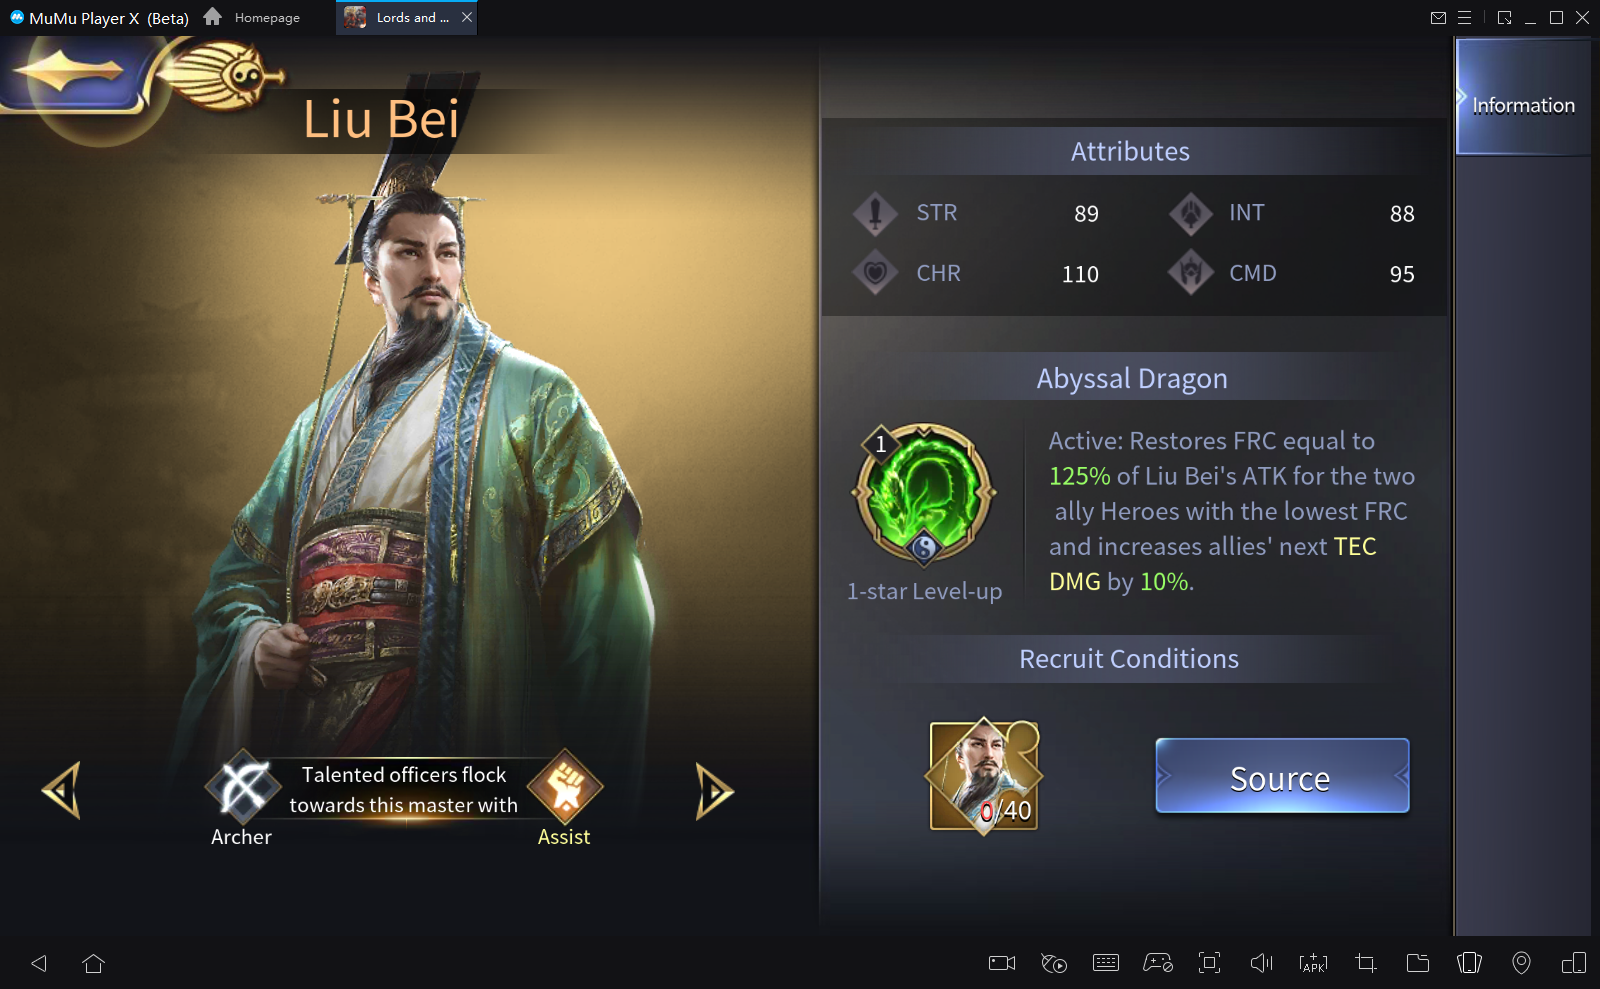  Lords and Tactics Liubei